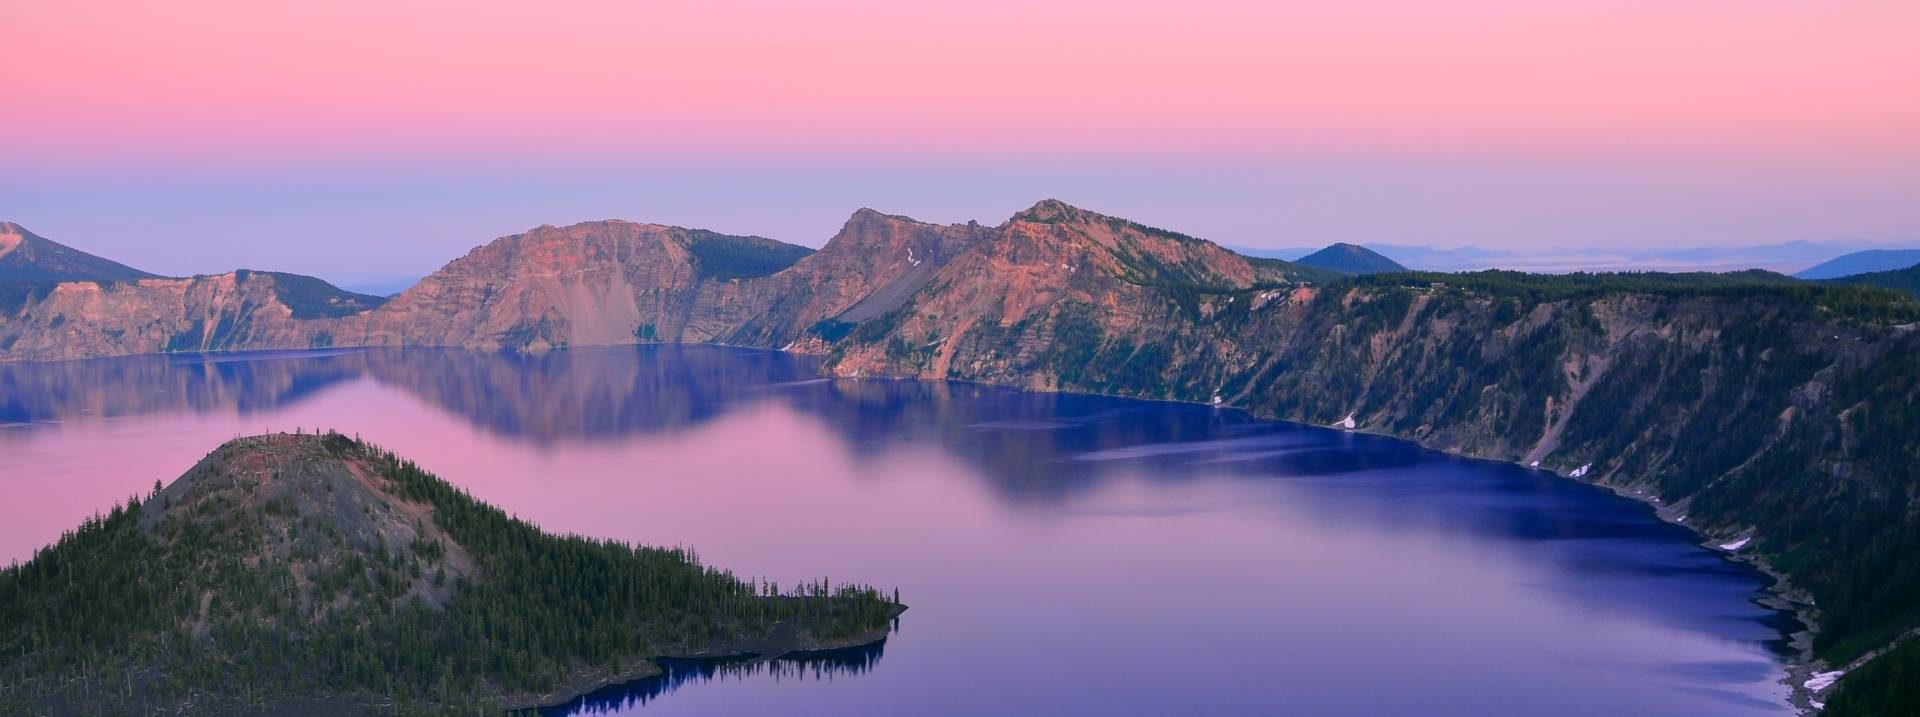 Planning a Trip to Crater Lake National Park